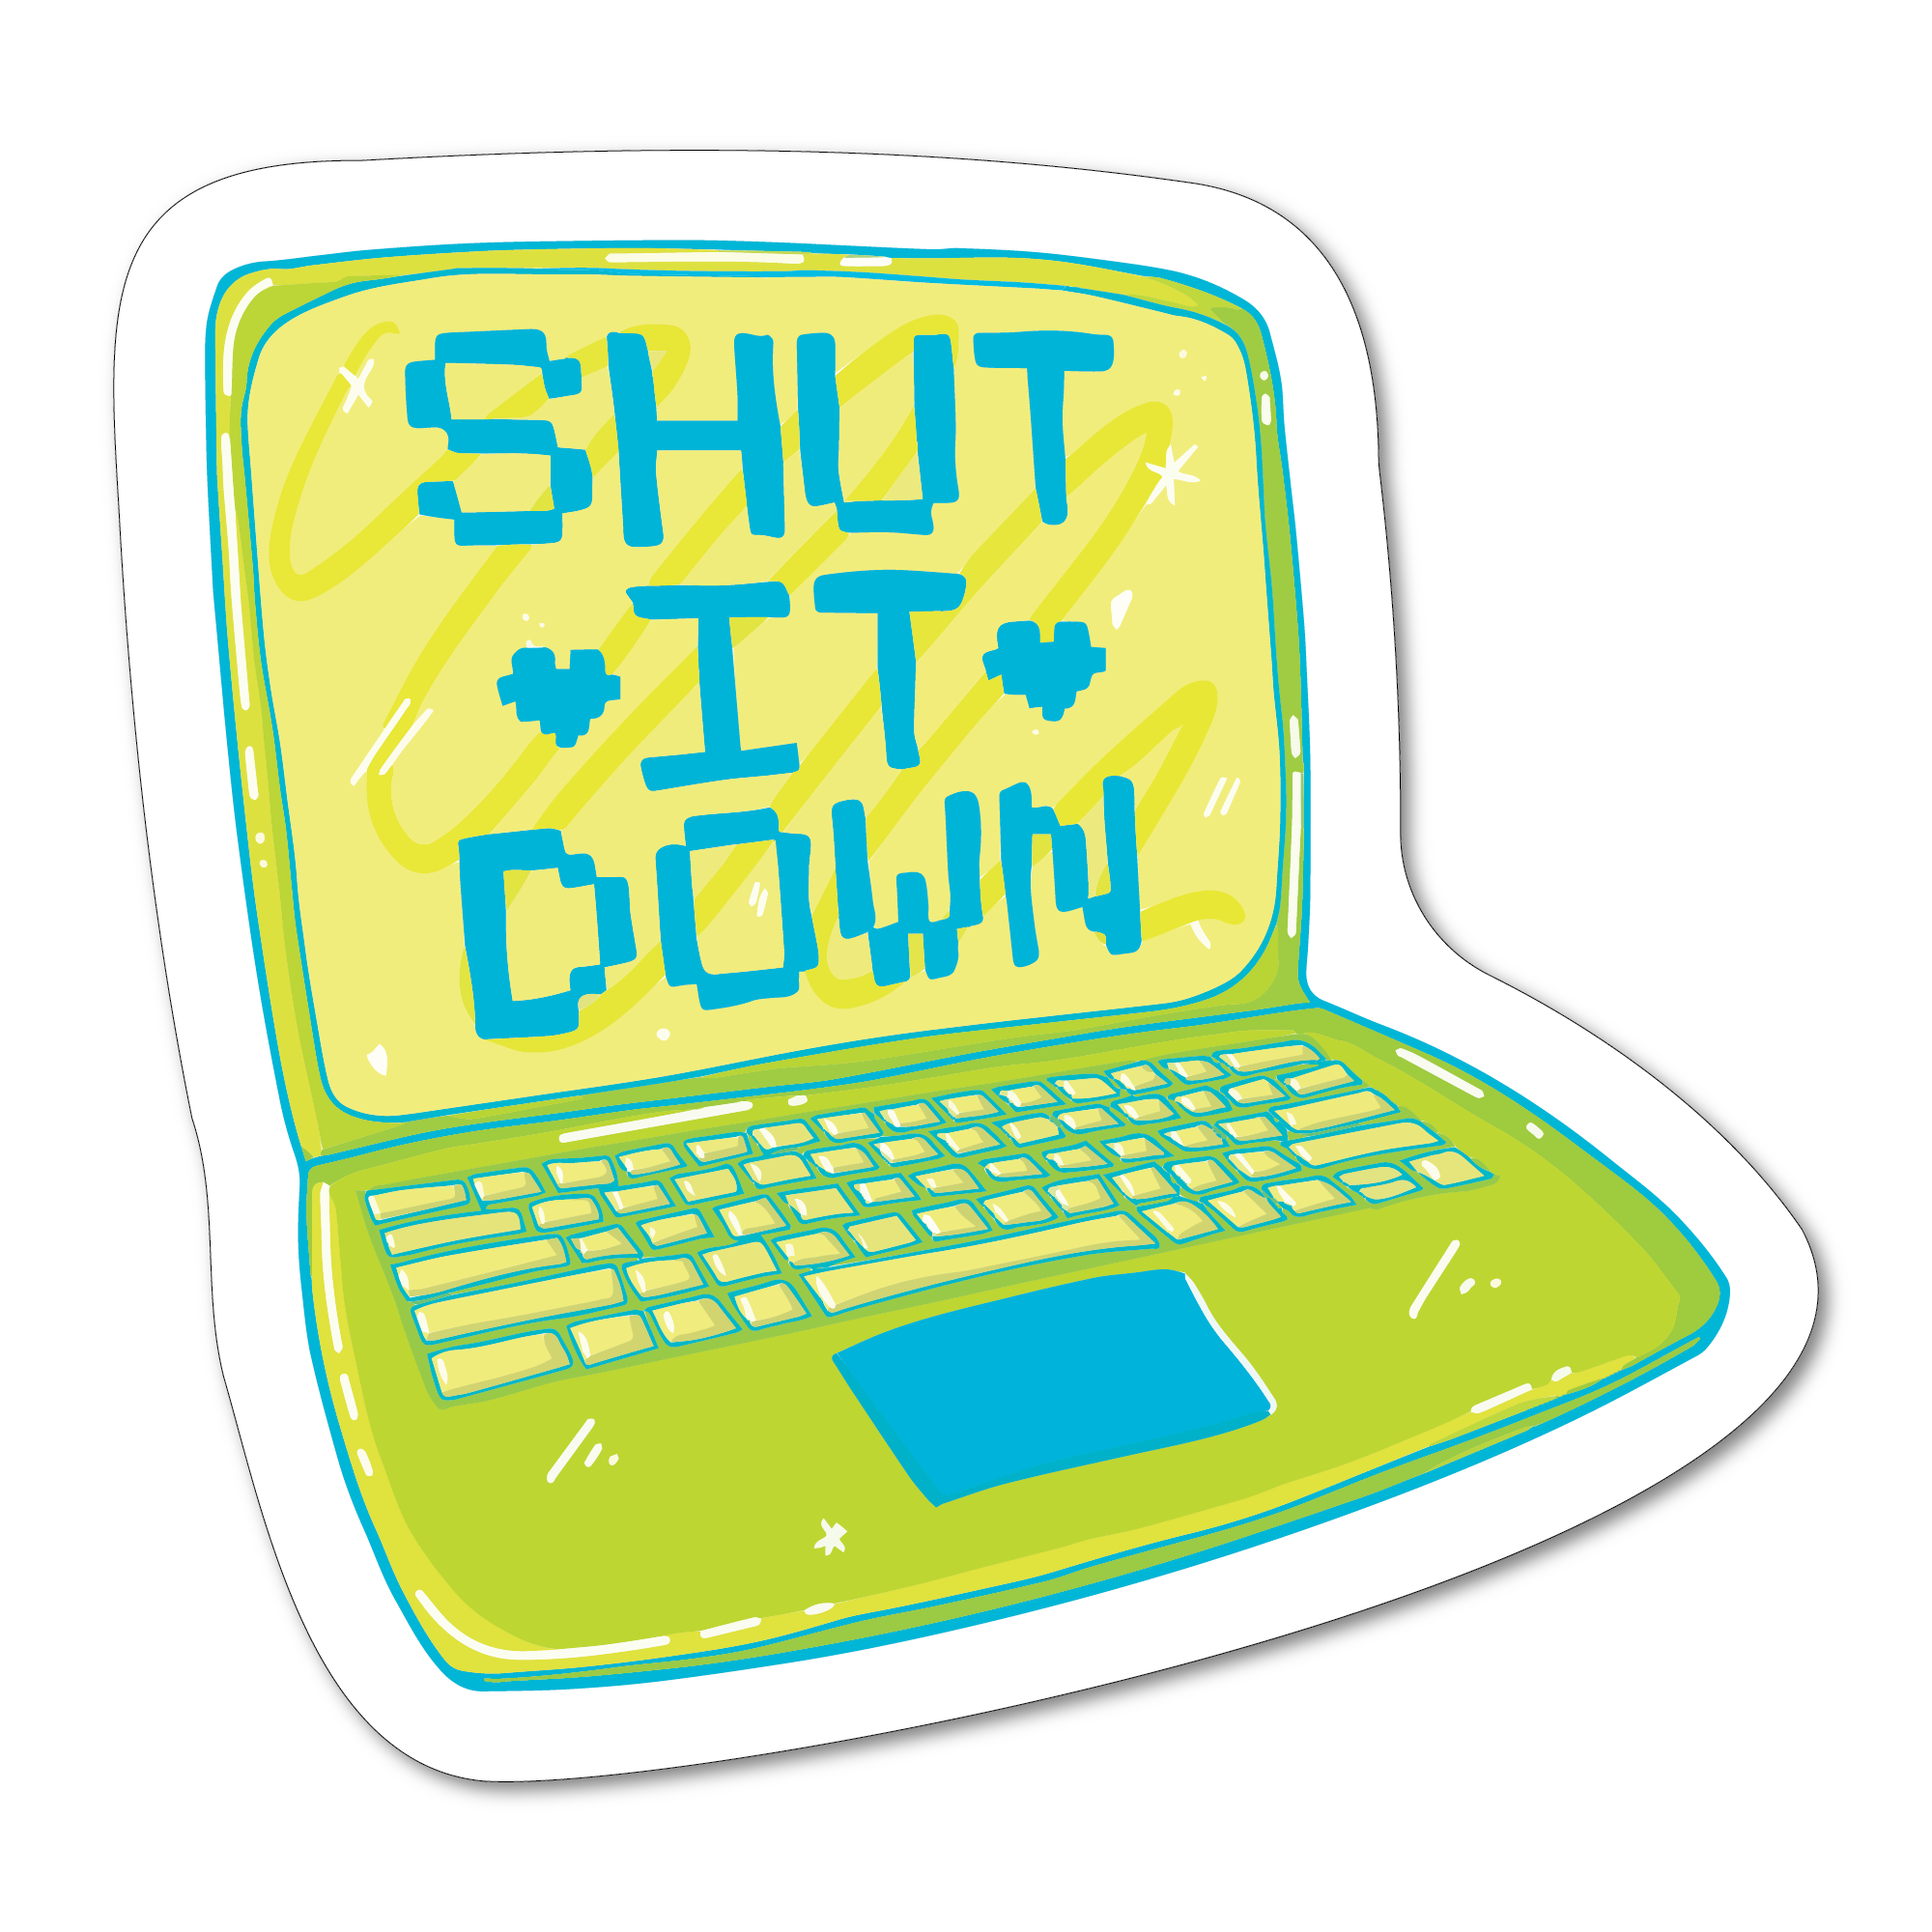 A small green sticker of a laptop that says shut it down to remind you to turn off your laptop